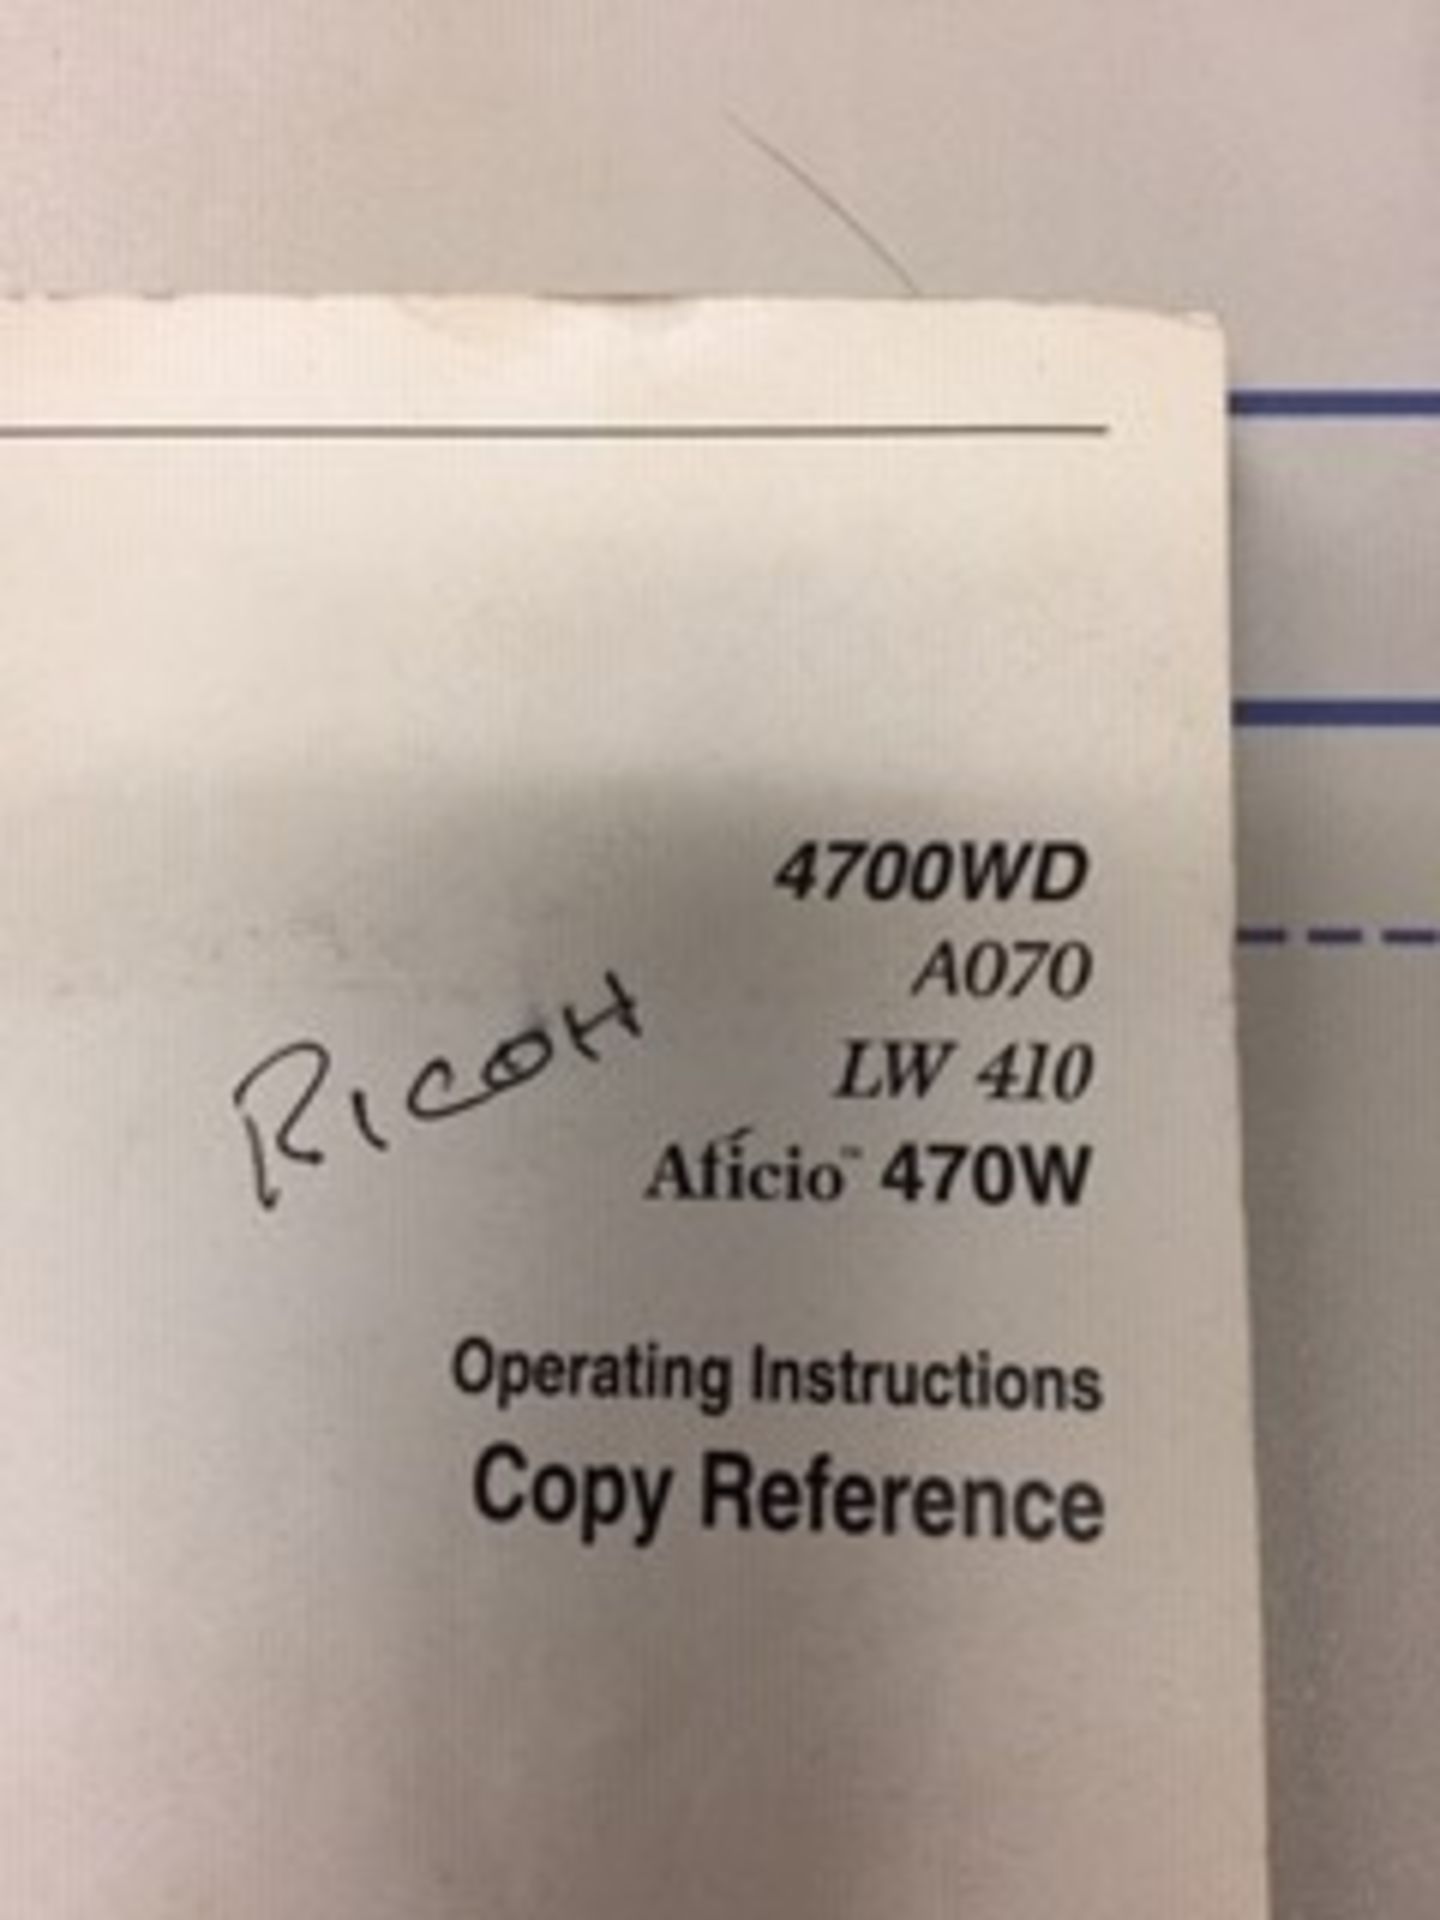 COPIER, RICOH ATICIO 470W A070-LW410, S/N J2020900092 (Located at: Midland Stamping & Fabricating, - Image 2 of 4